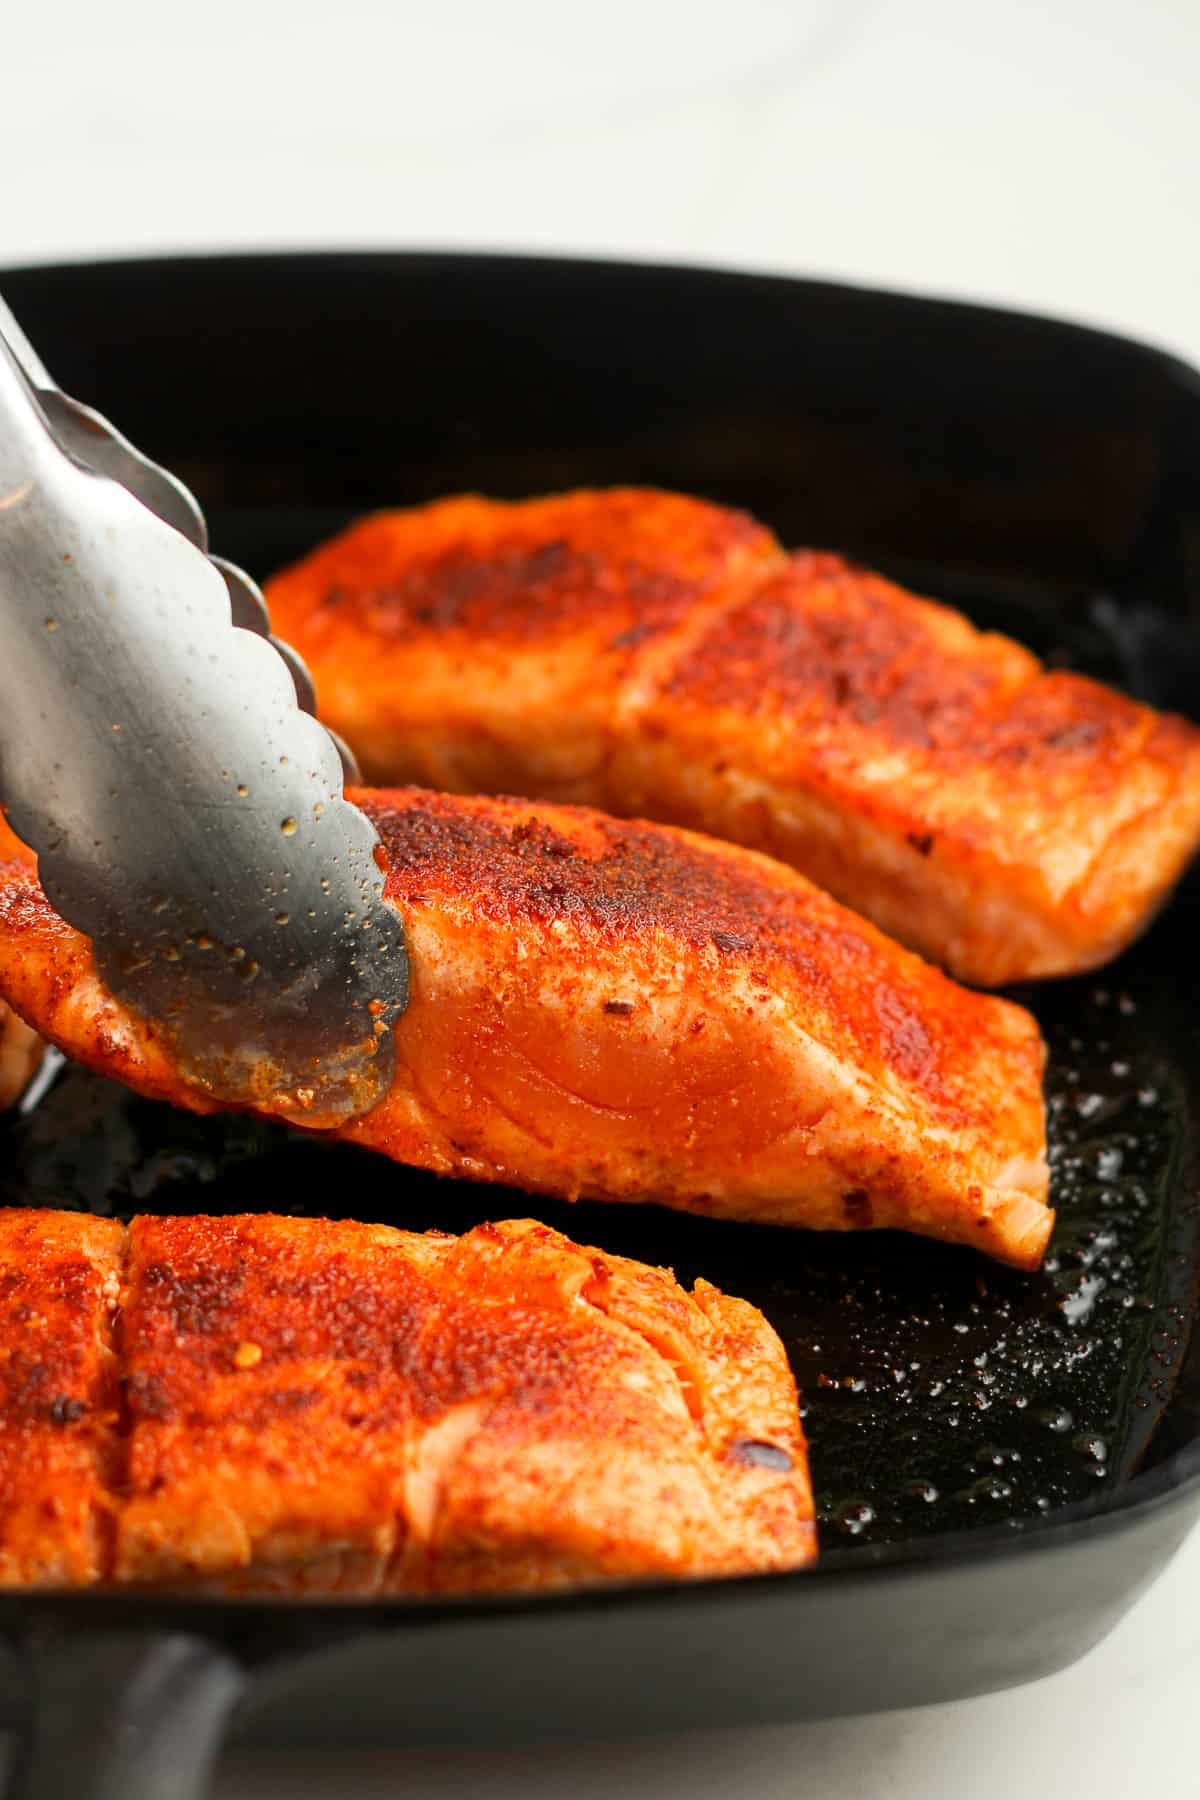 A tongs lifting up a piece of partially cooked blackened salmon.